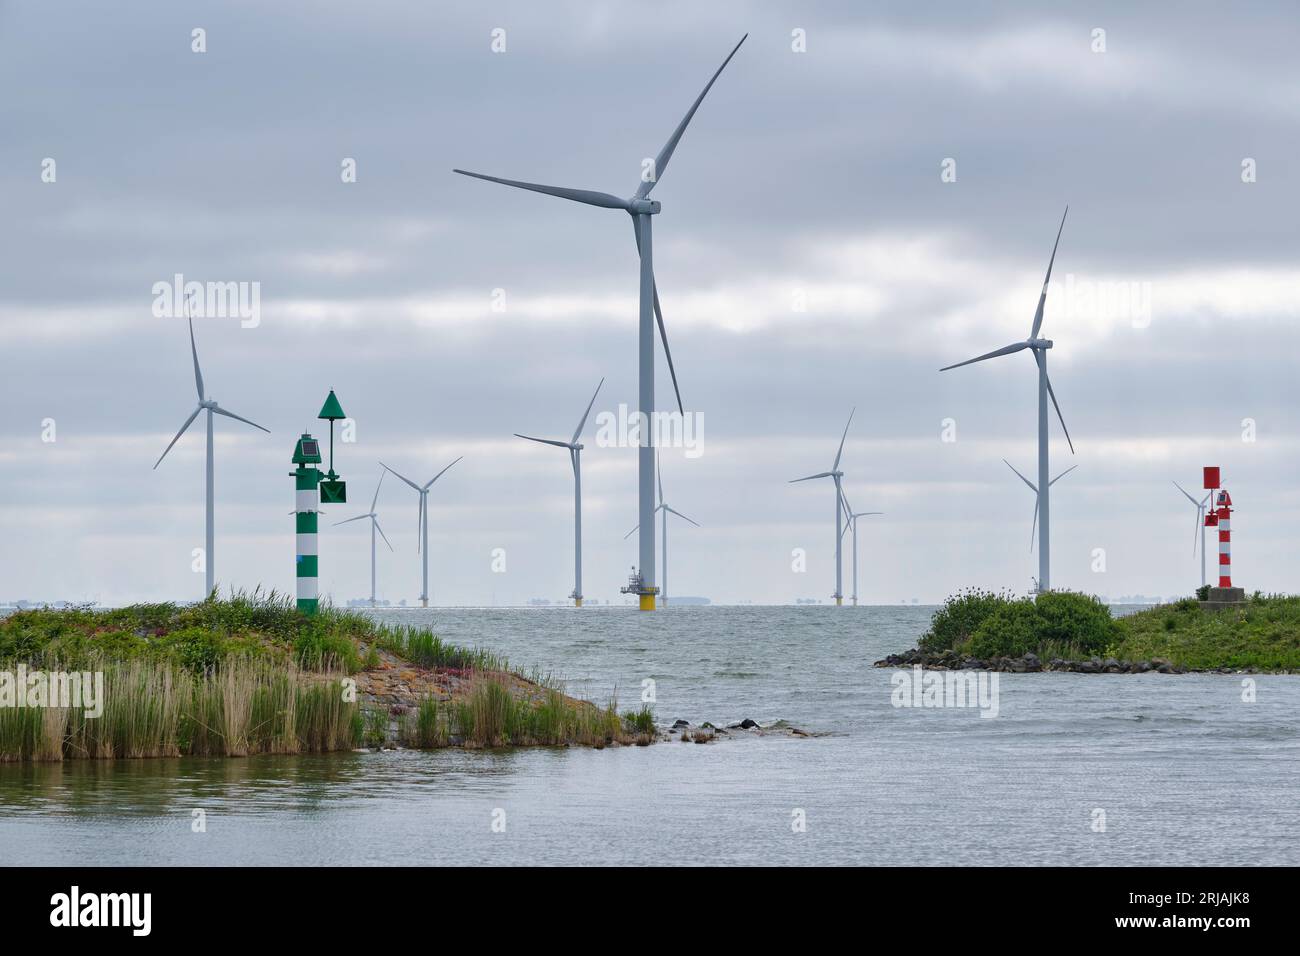 View of an offshore wind farm from the harbour in the early morning light. Windpark Fryslân was built in the IJsselmeer lake in the Netherlands Stock Photo